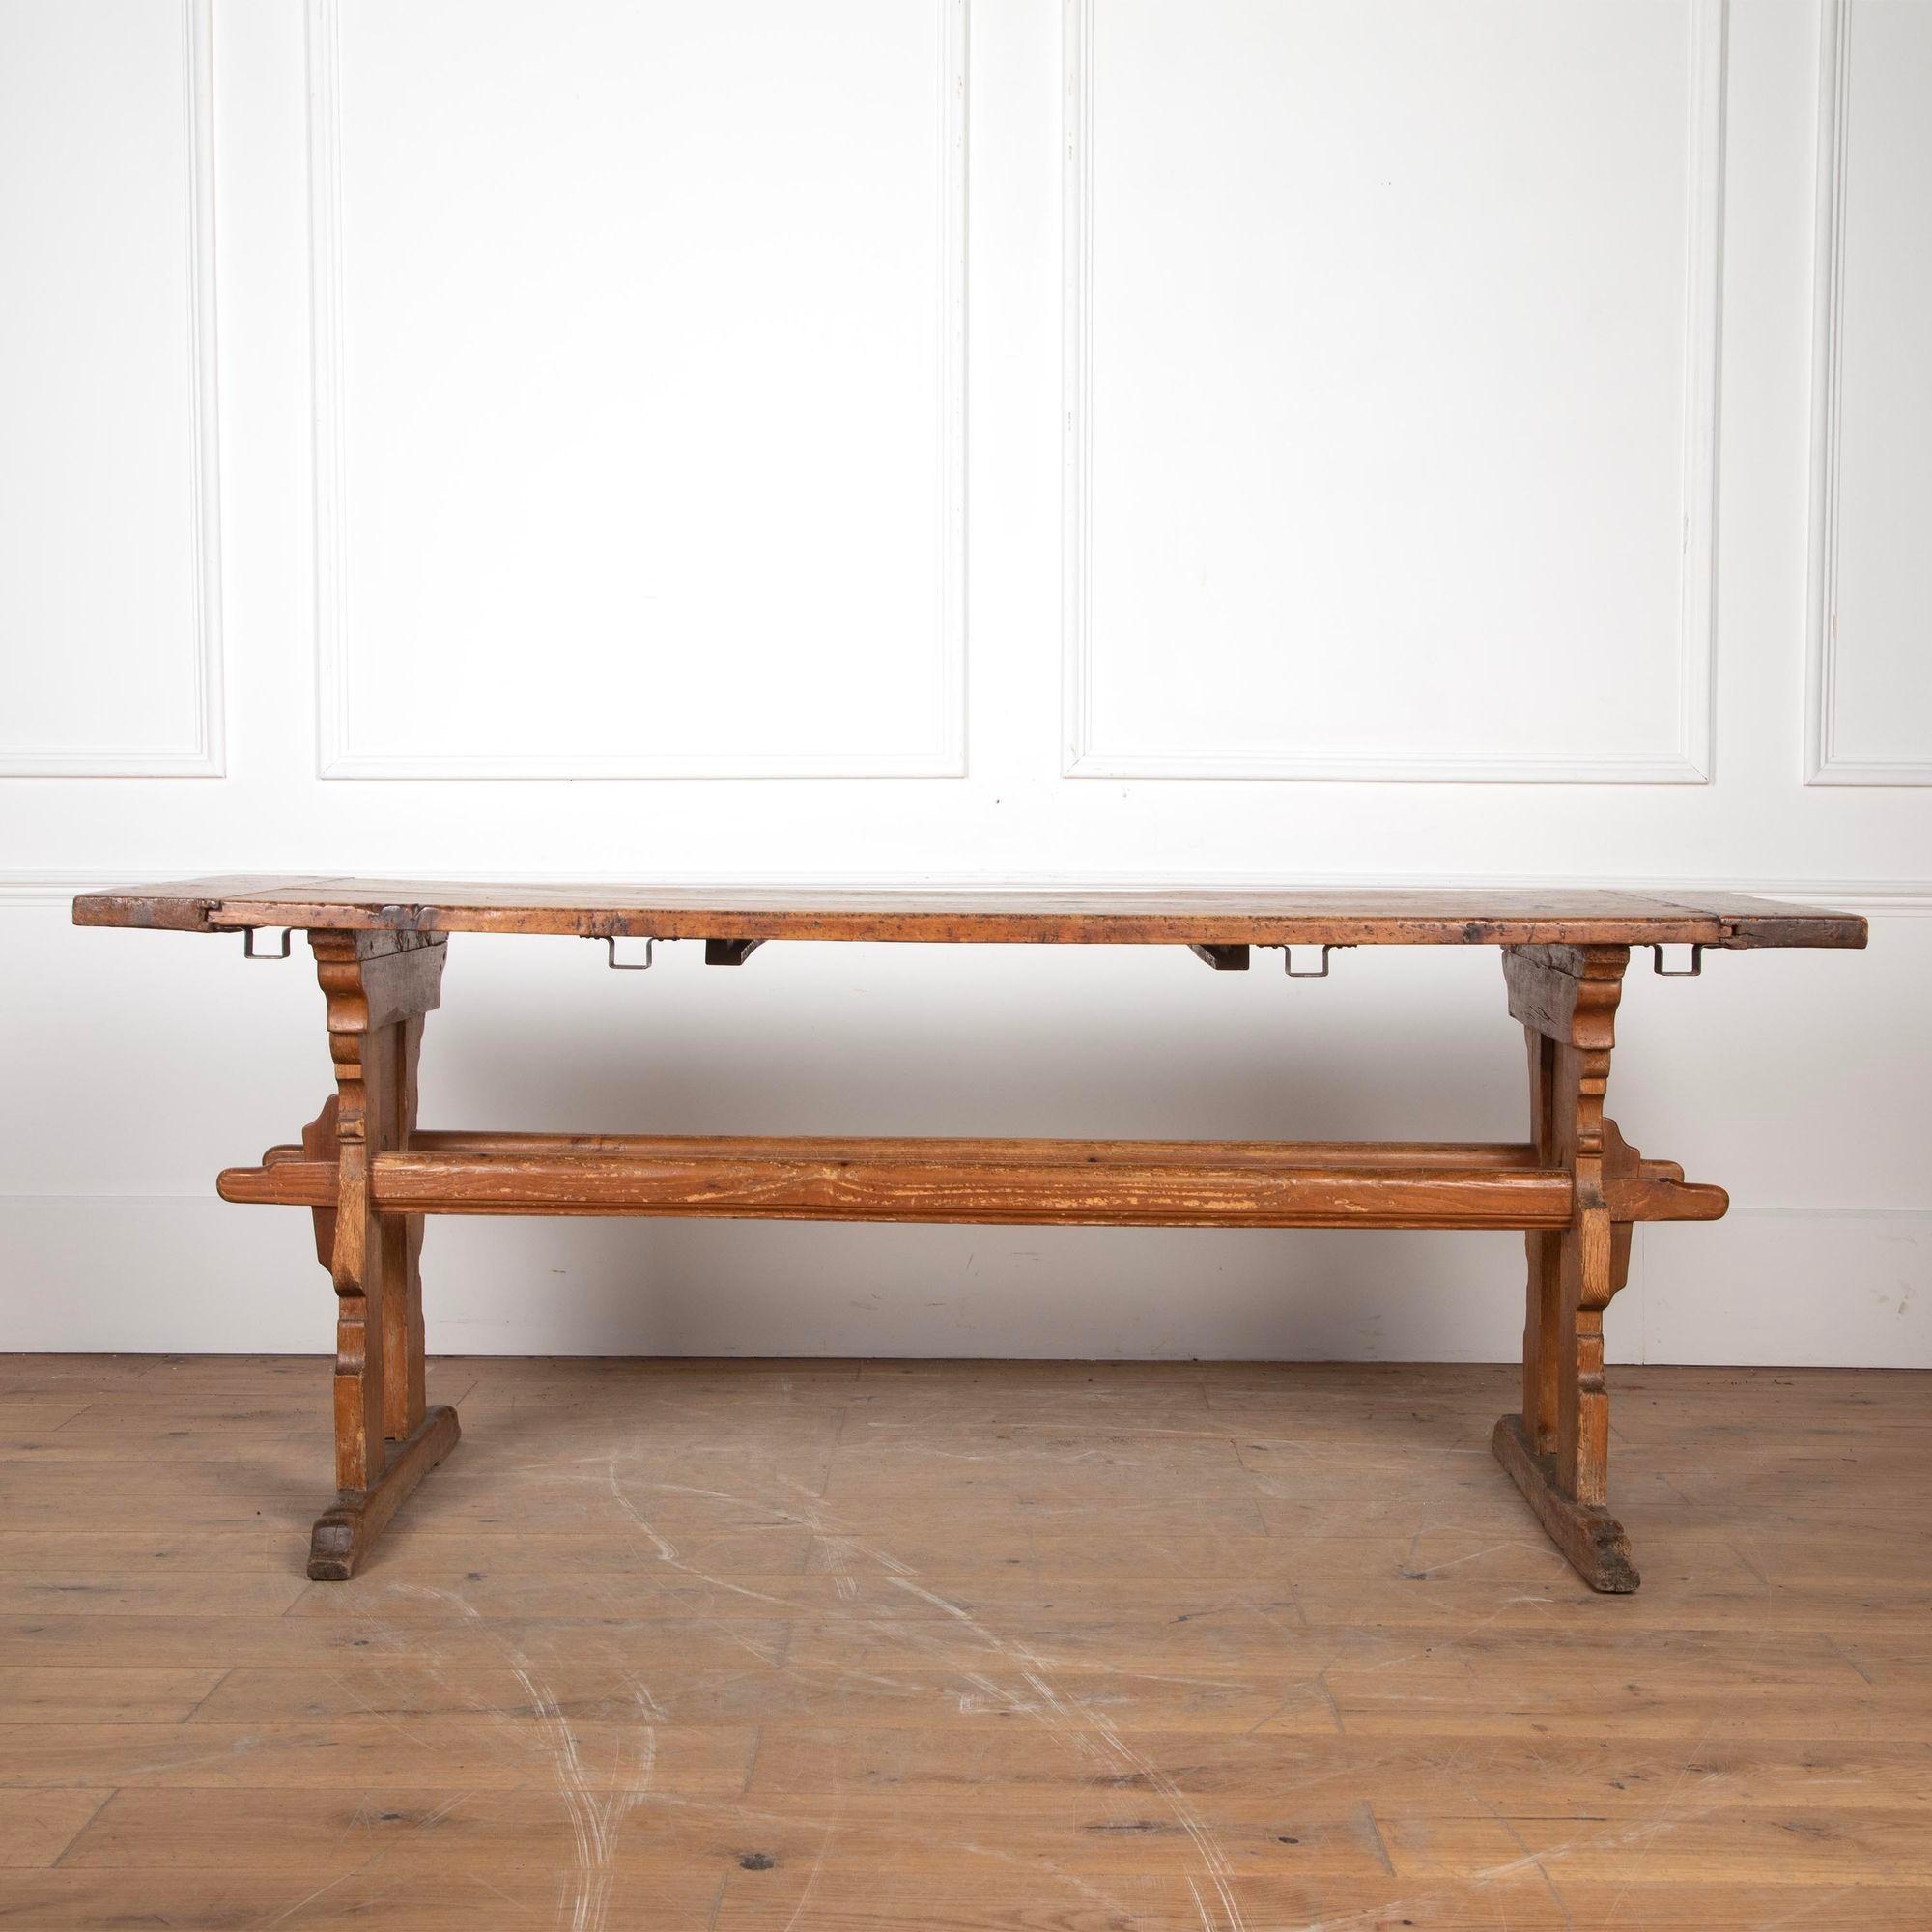 18th Century Scandinavian pine refectory table.
This table is of beautiful colour and does show signs of age related wear.